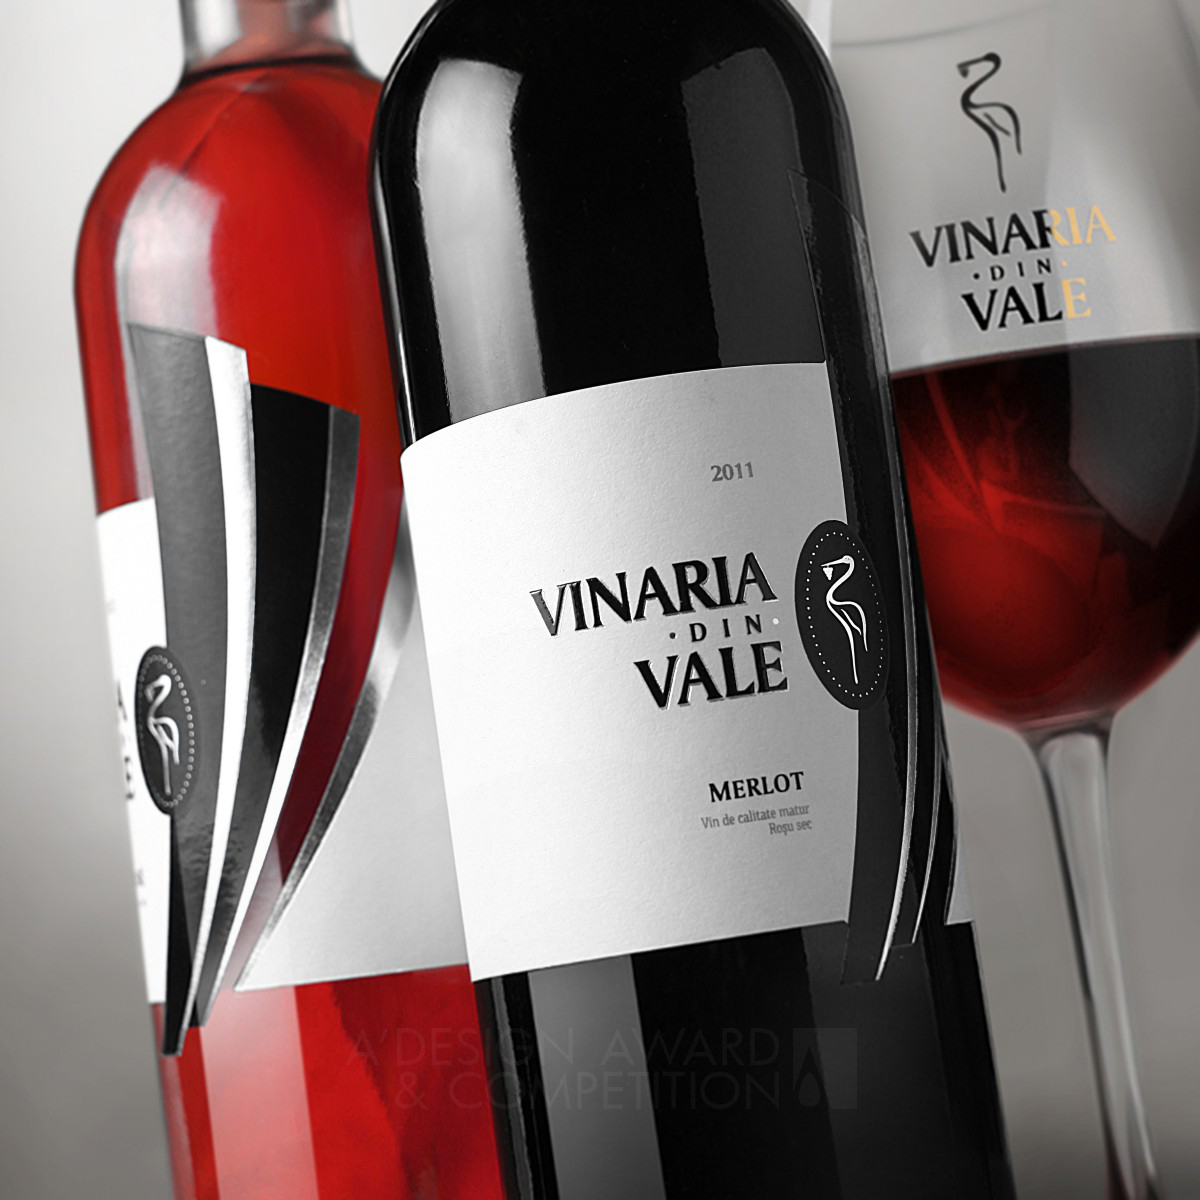 Vinaria din Vale <b>Series of quality wines